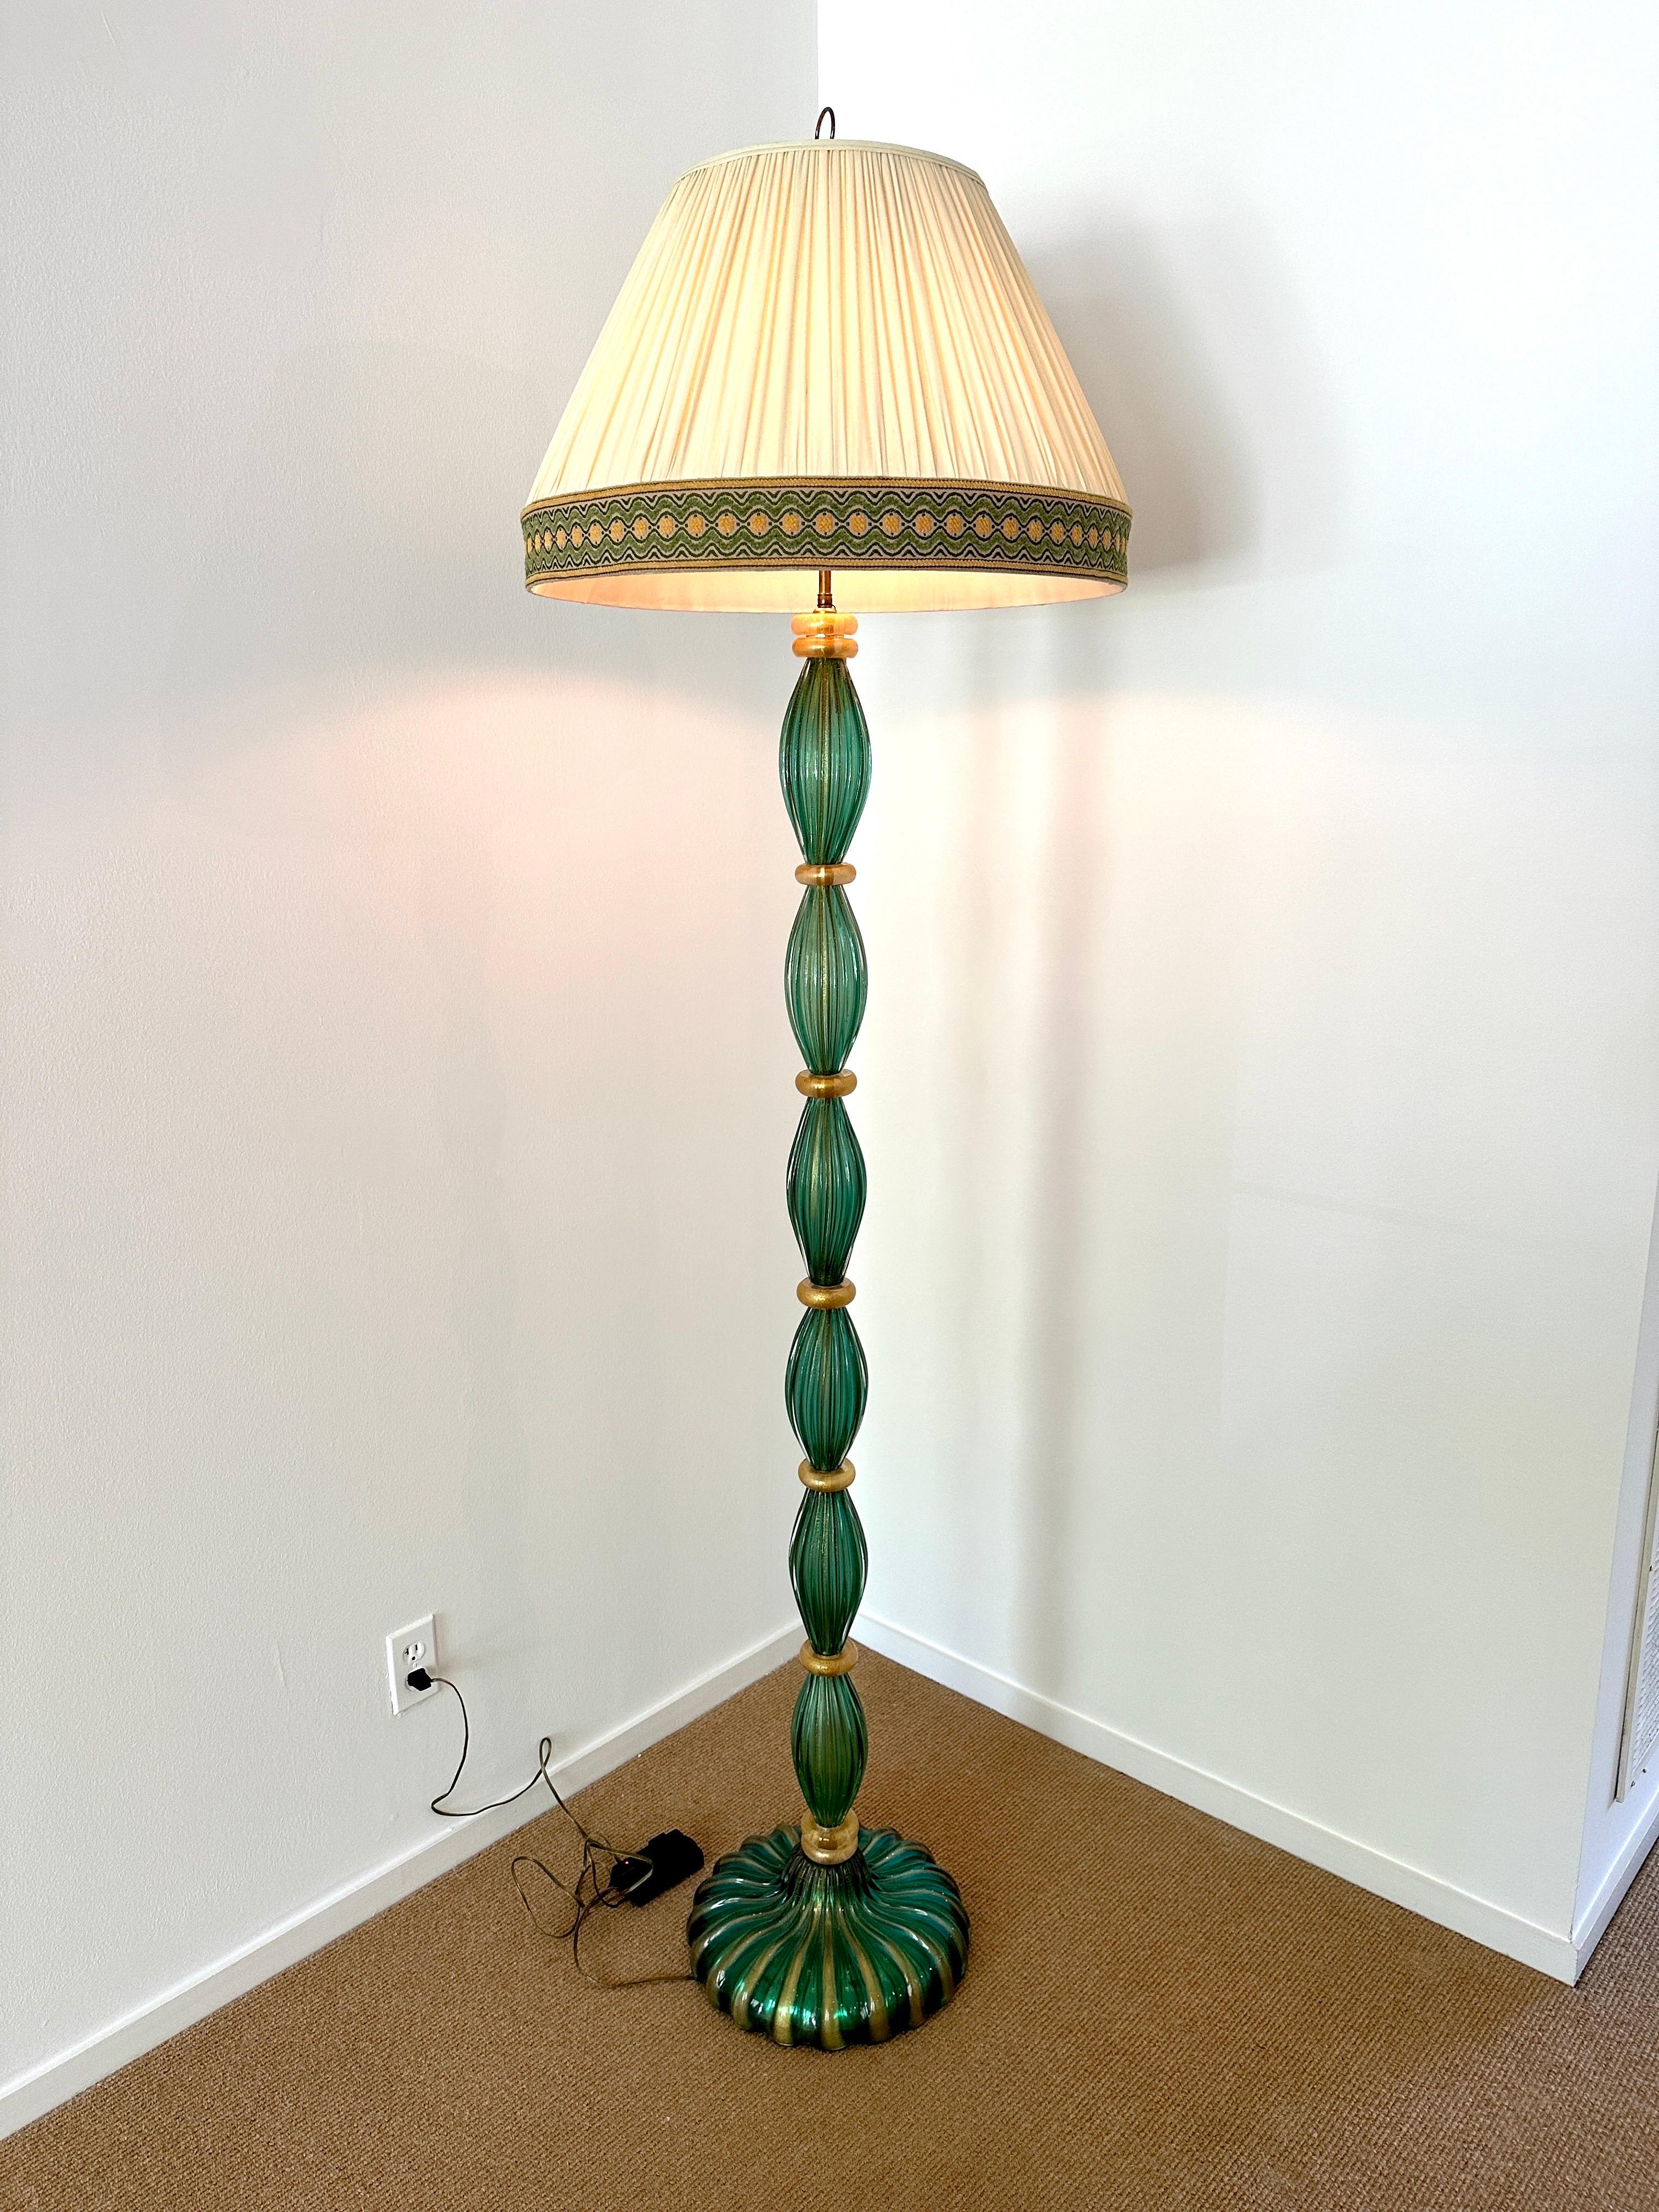 Vintage Barovier Green Murano Glass Floor Lamp w/ Gold Foil Inclusions In Good Condition For Sale In East Hampton, NY